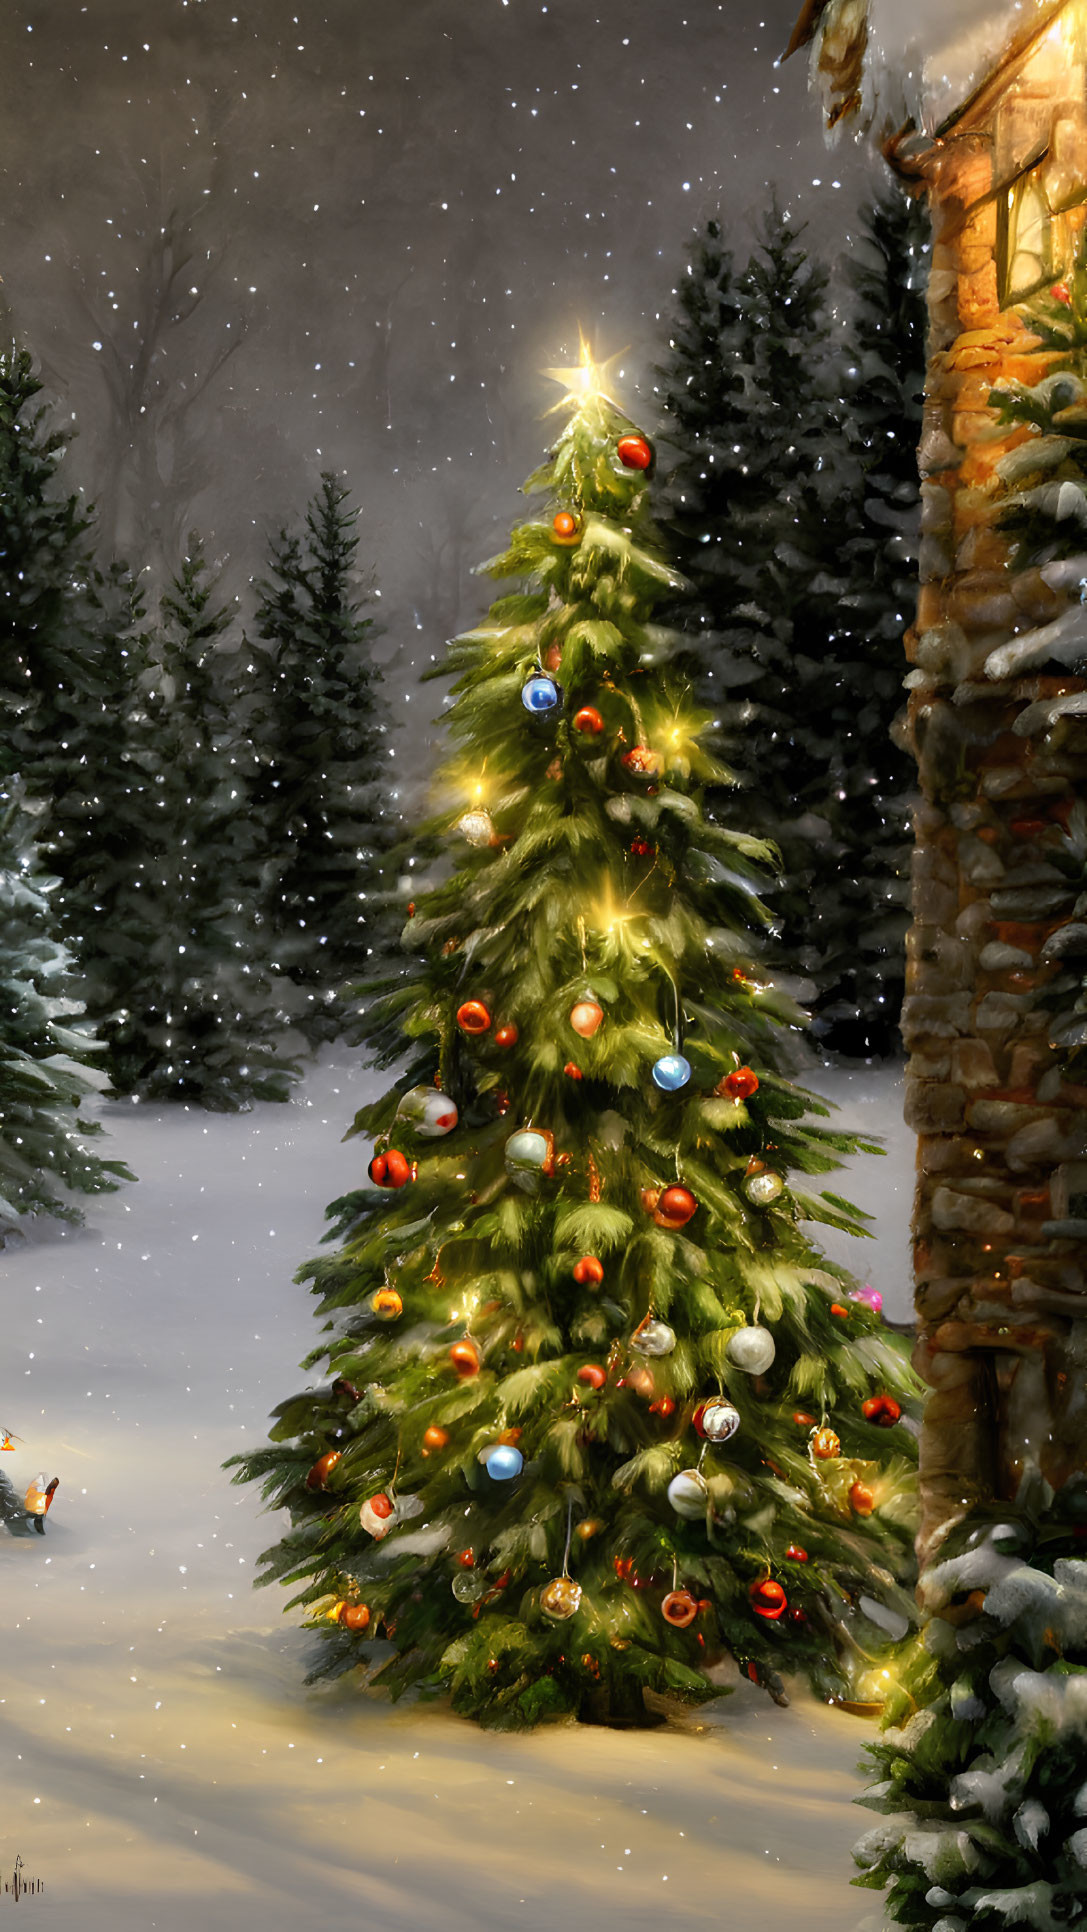 Decorated Christmas tree with lights and ornaments in snowy outdoor setting